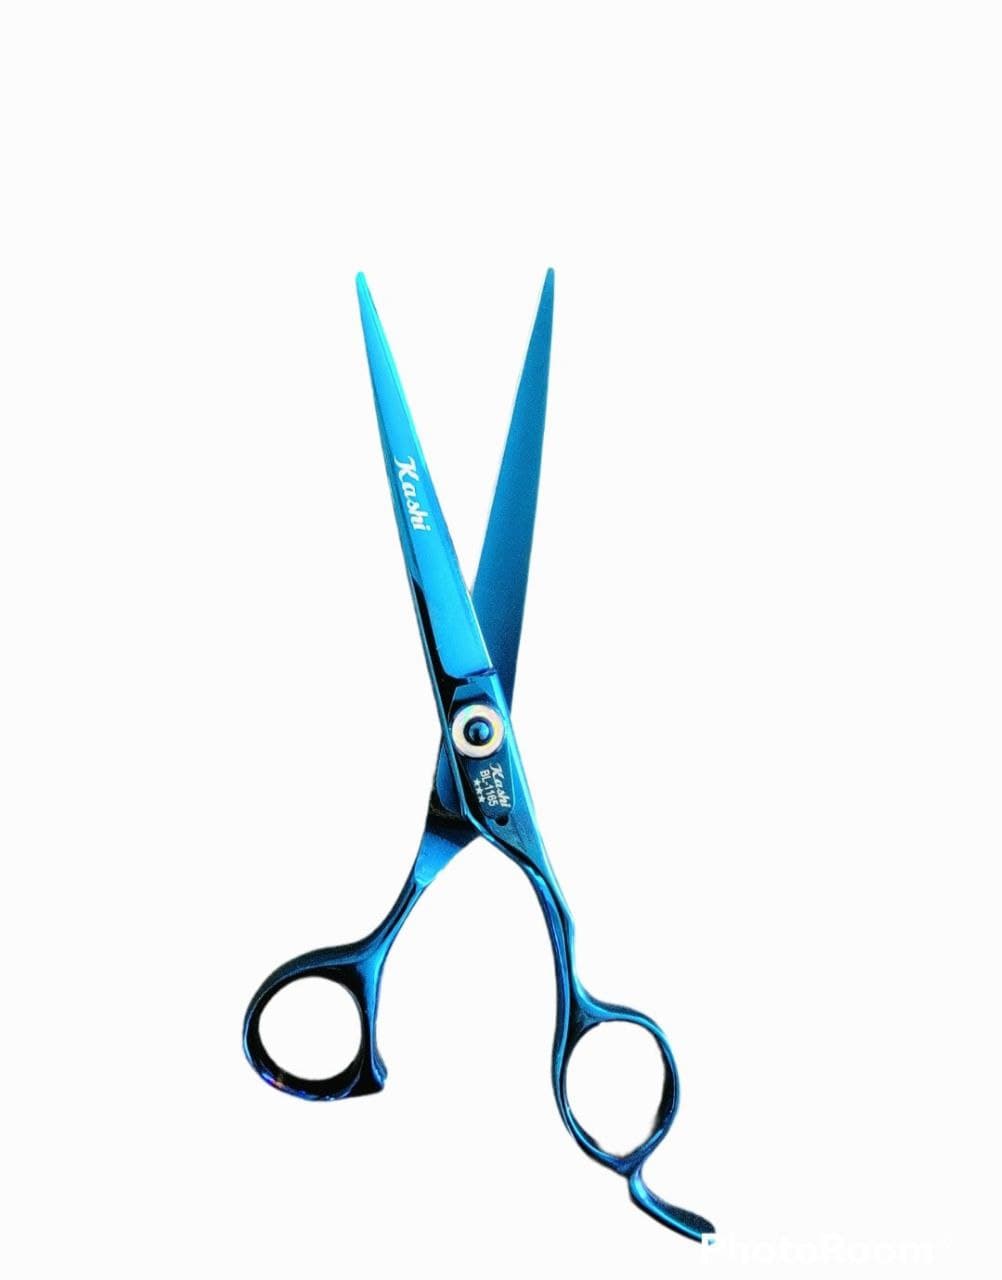 Kashi BL-1165 Professional Hair Cutting Shears Japanese Steel, 6.5 inch Blue Color